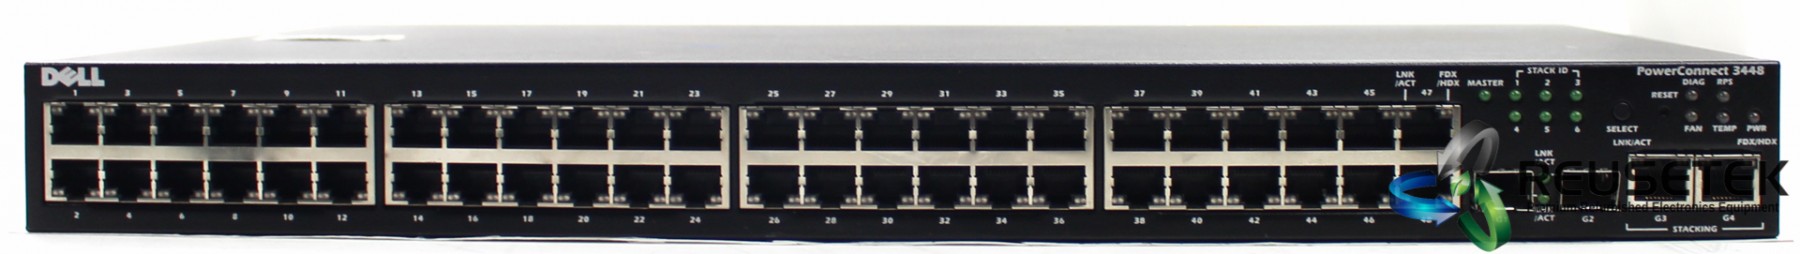 CDH5035-Dell PowerConnect 3448 48 Port PoE Managed Switch-image